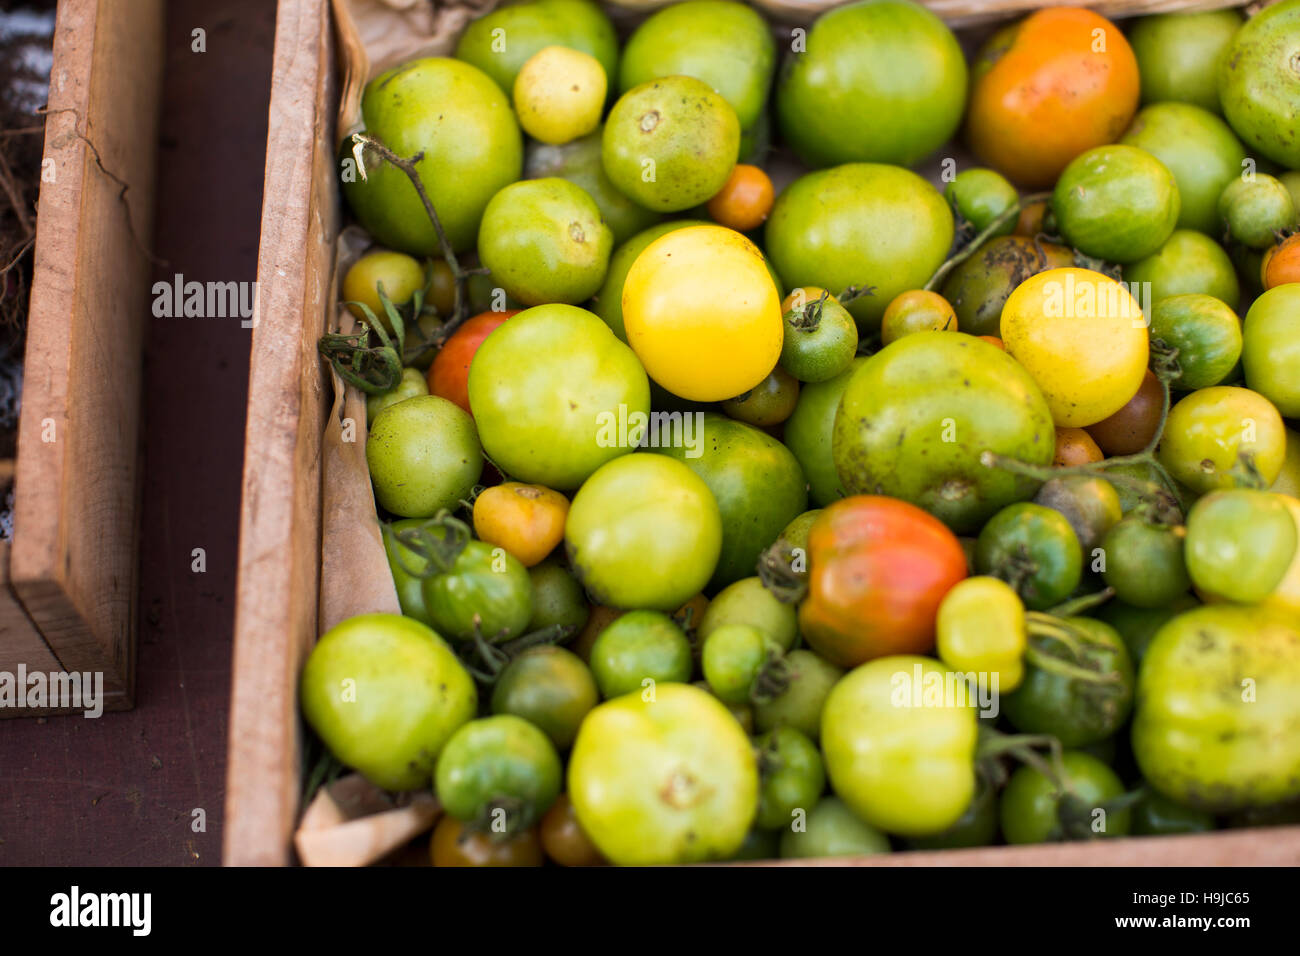 Rustic looking heritage tomatoes in a wooden crate in natural light. Stock Photo